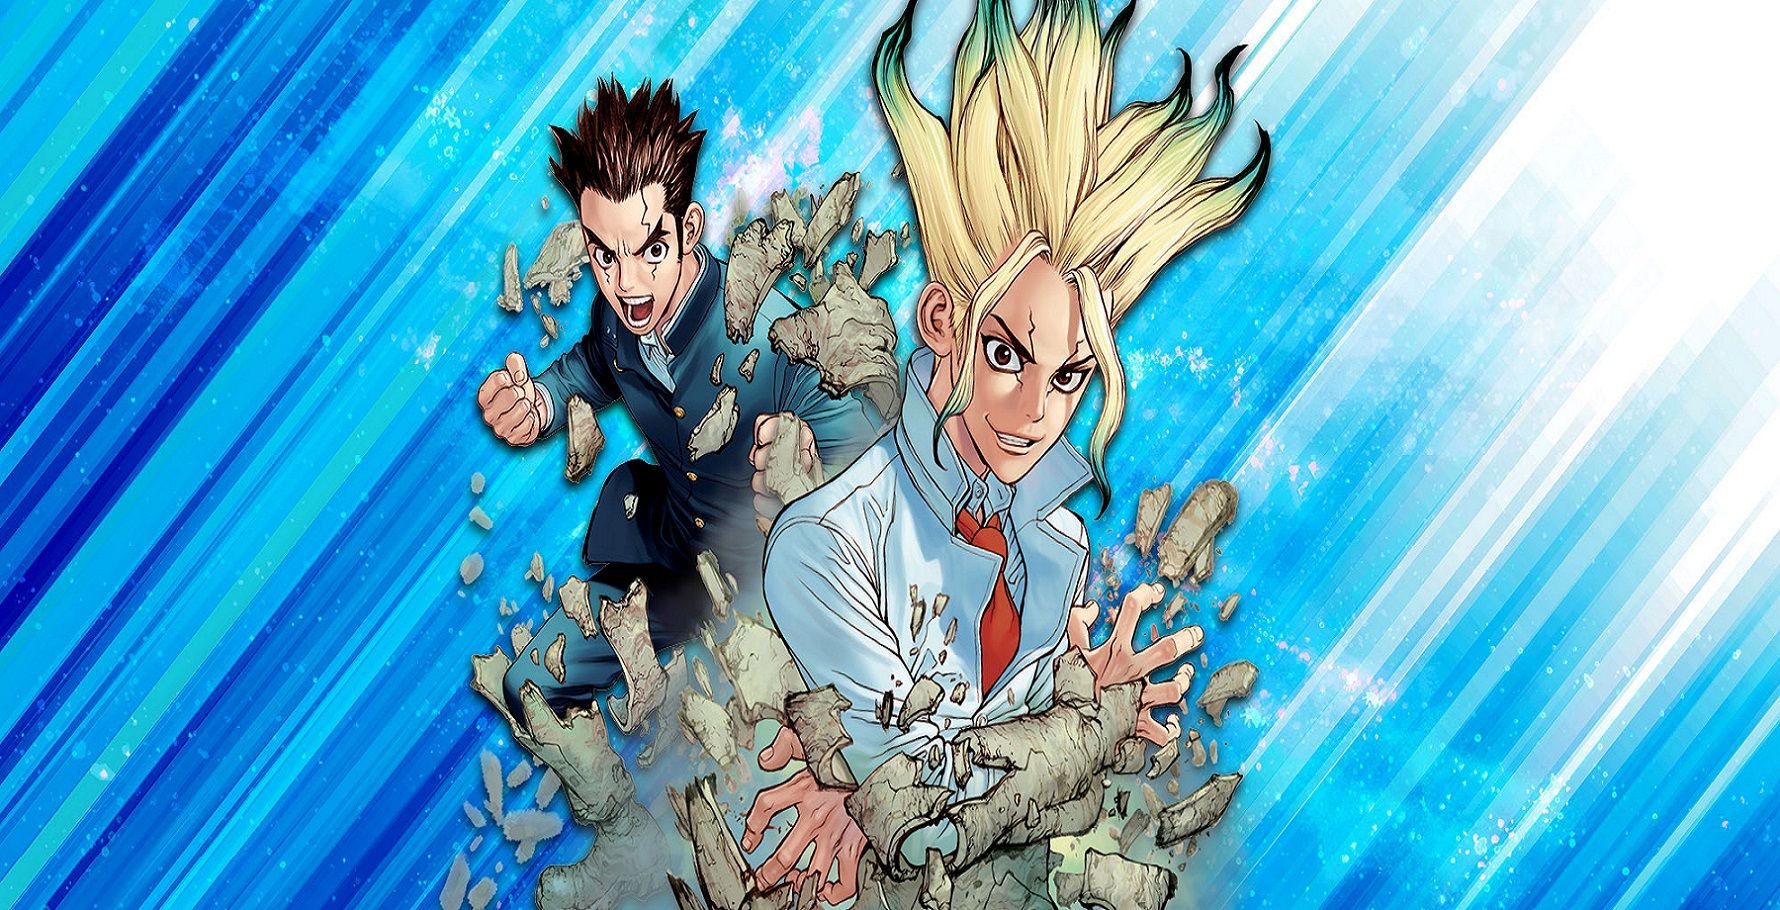 10 Things About Dr. Stone Anime Fans Should Know